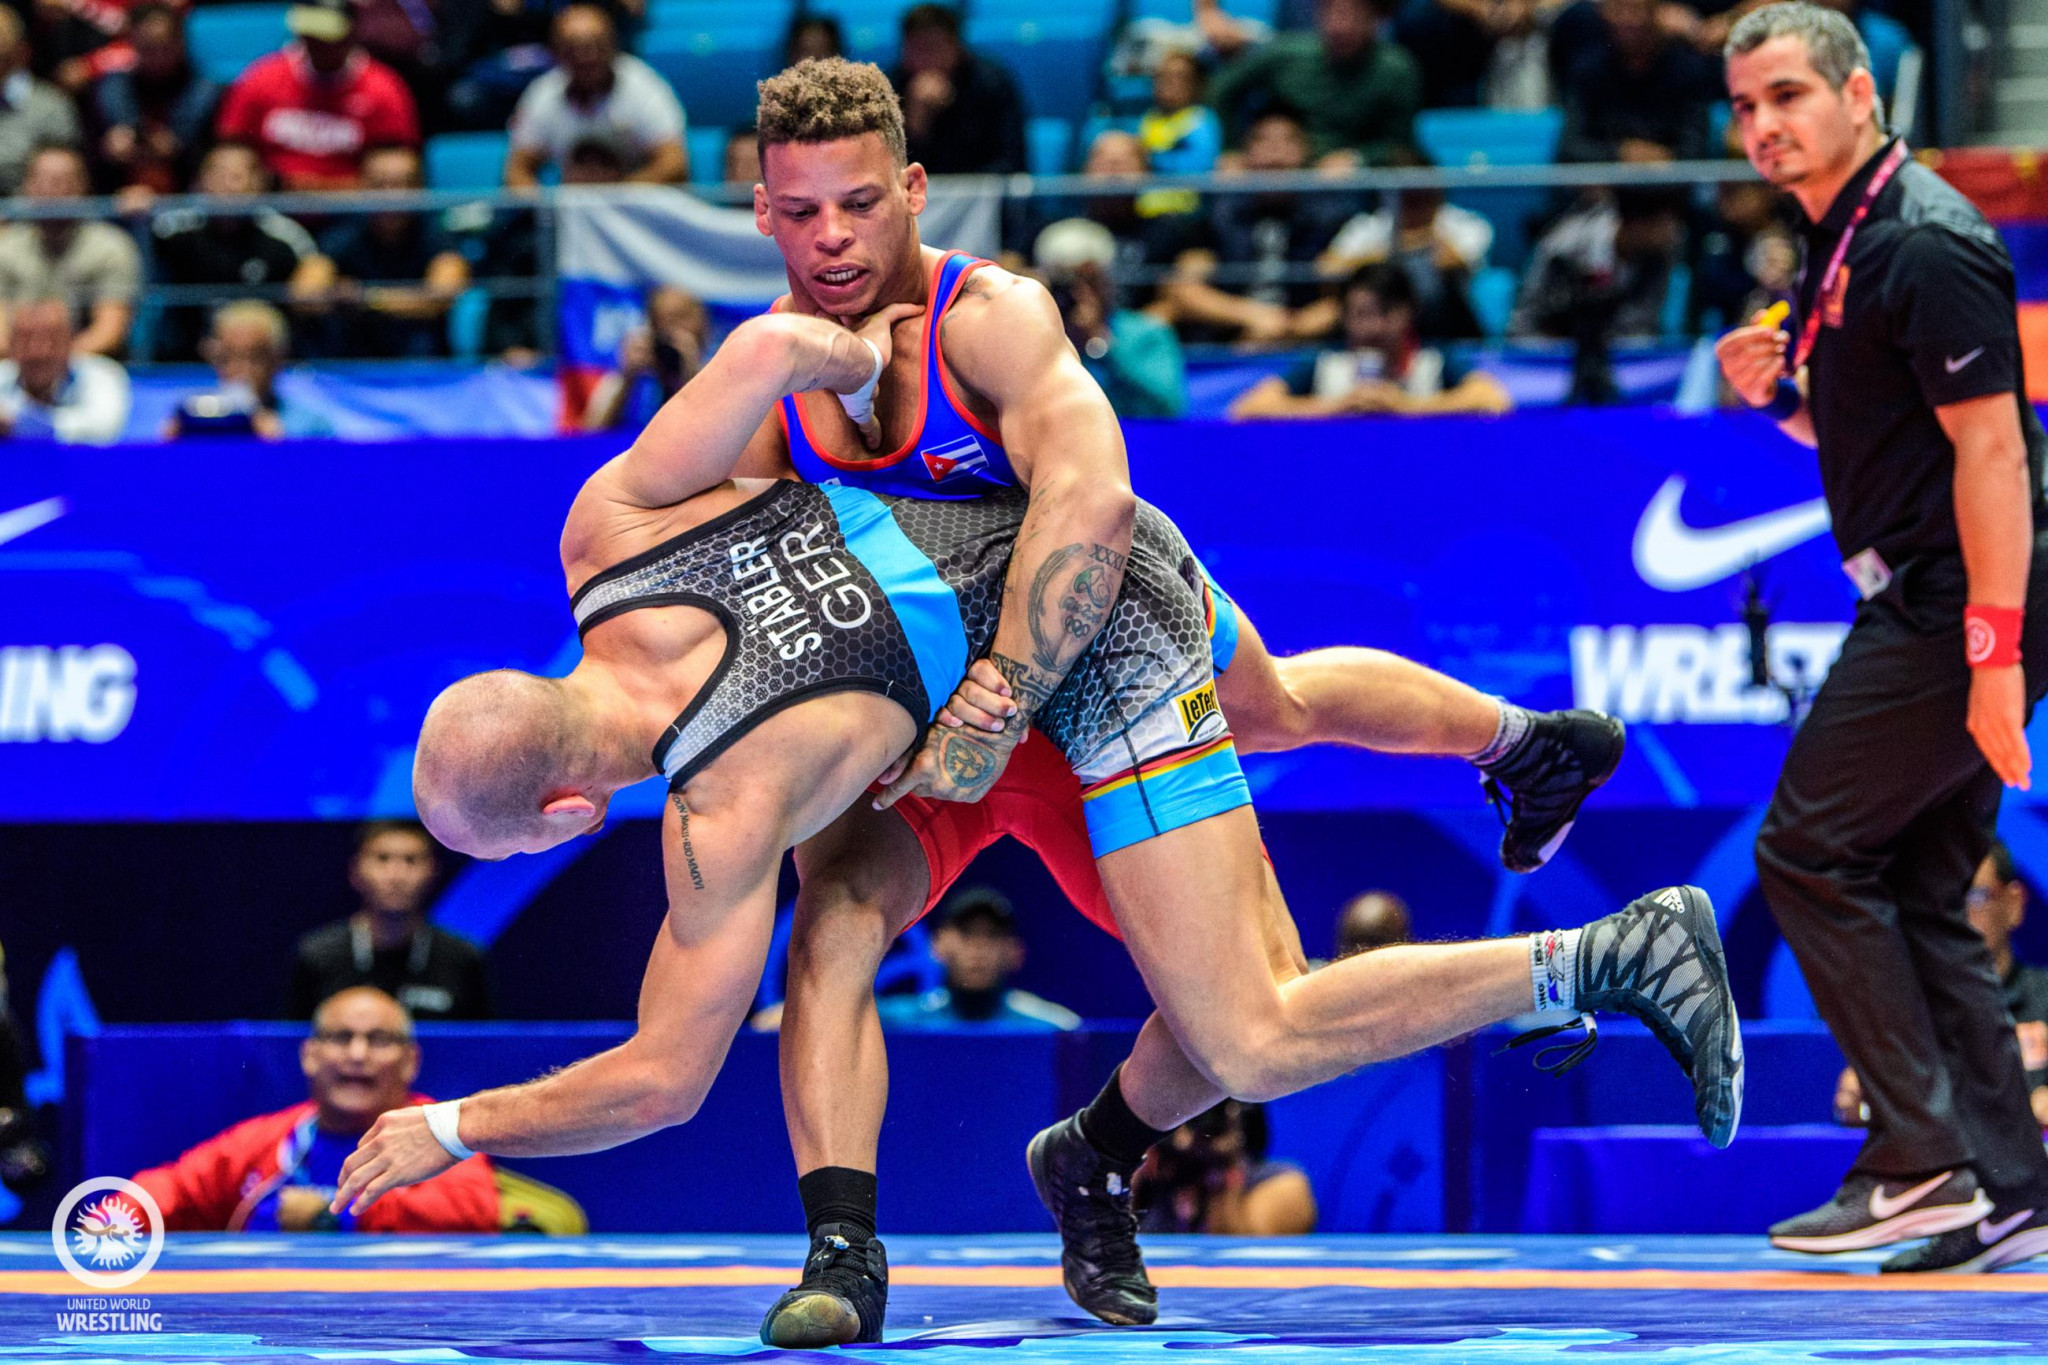 Cuba's Rio 2016 and double world champion Ismael Borrero Molina earned his sixth Pan American wrestling title with victory in the Greco-Roman 67kg class in Ottawa ©UWW